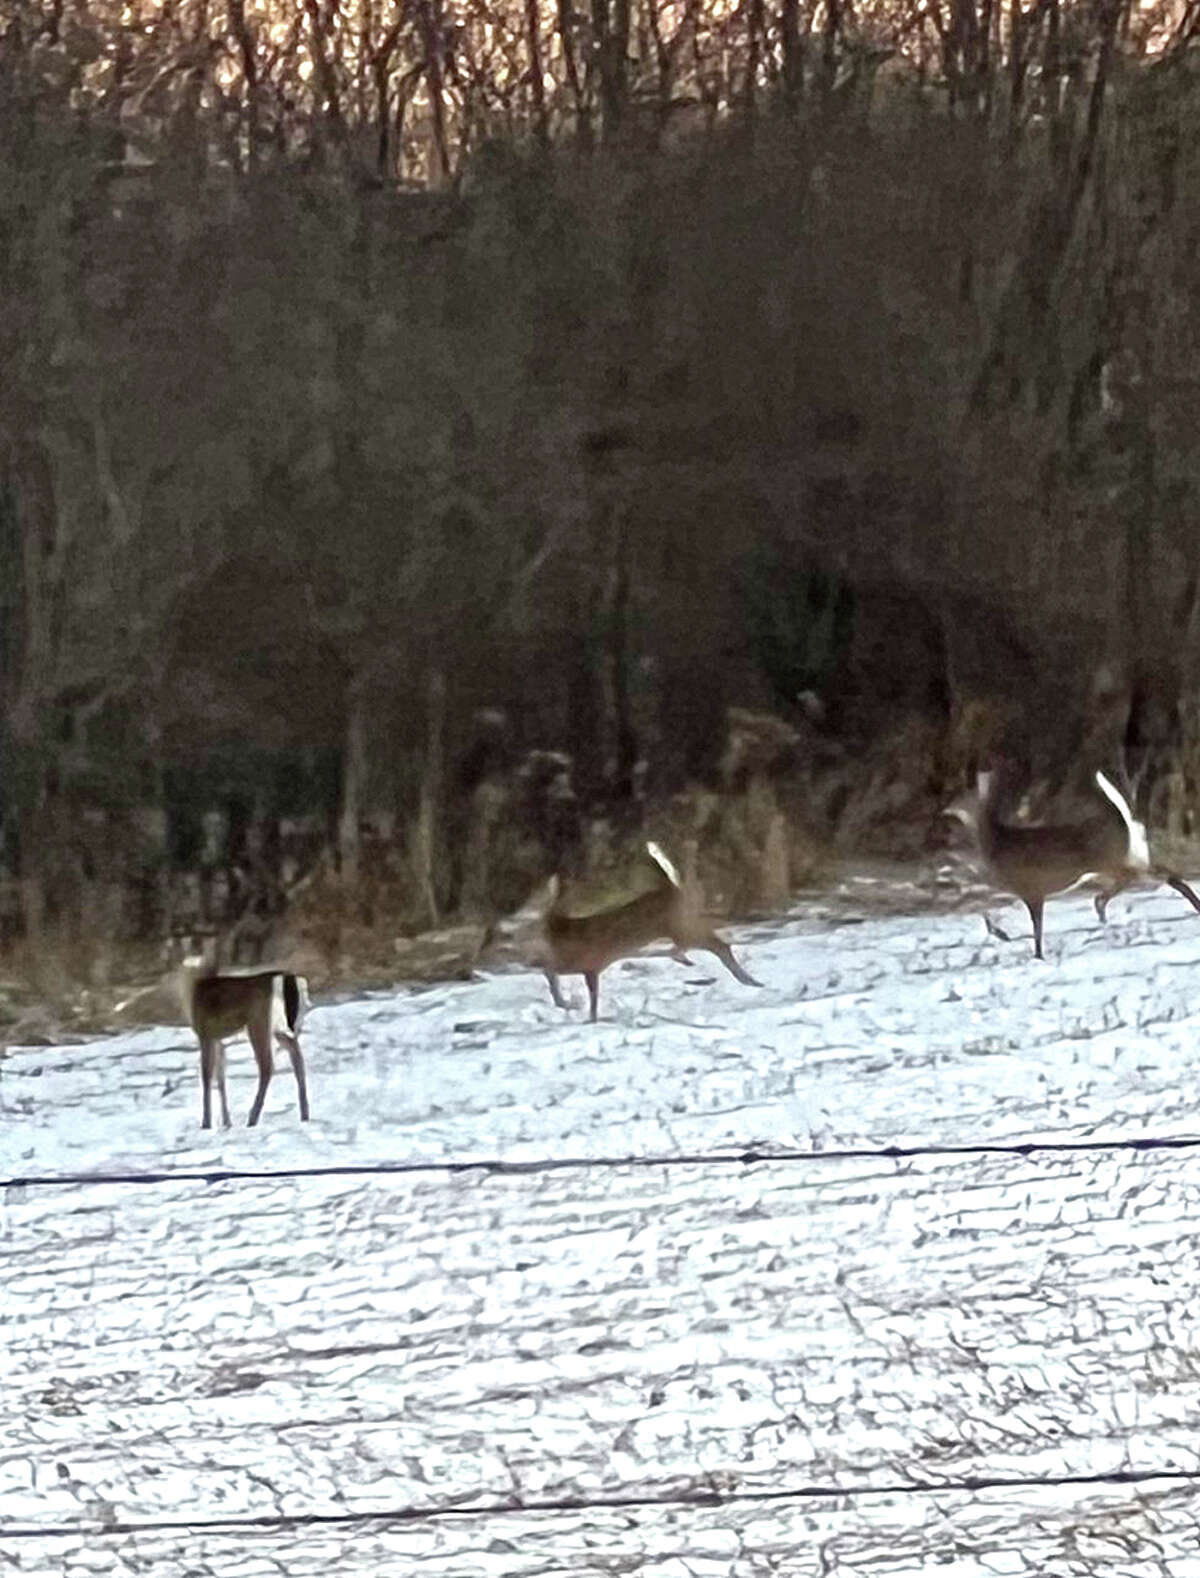 Deer make their way home across a snow-covered field.